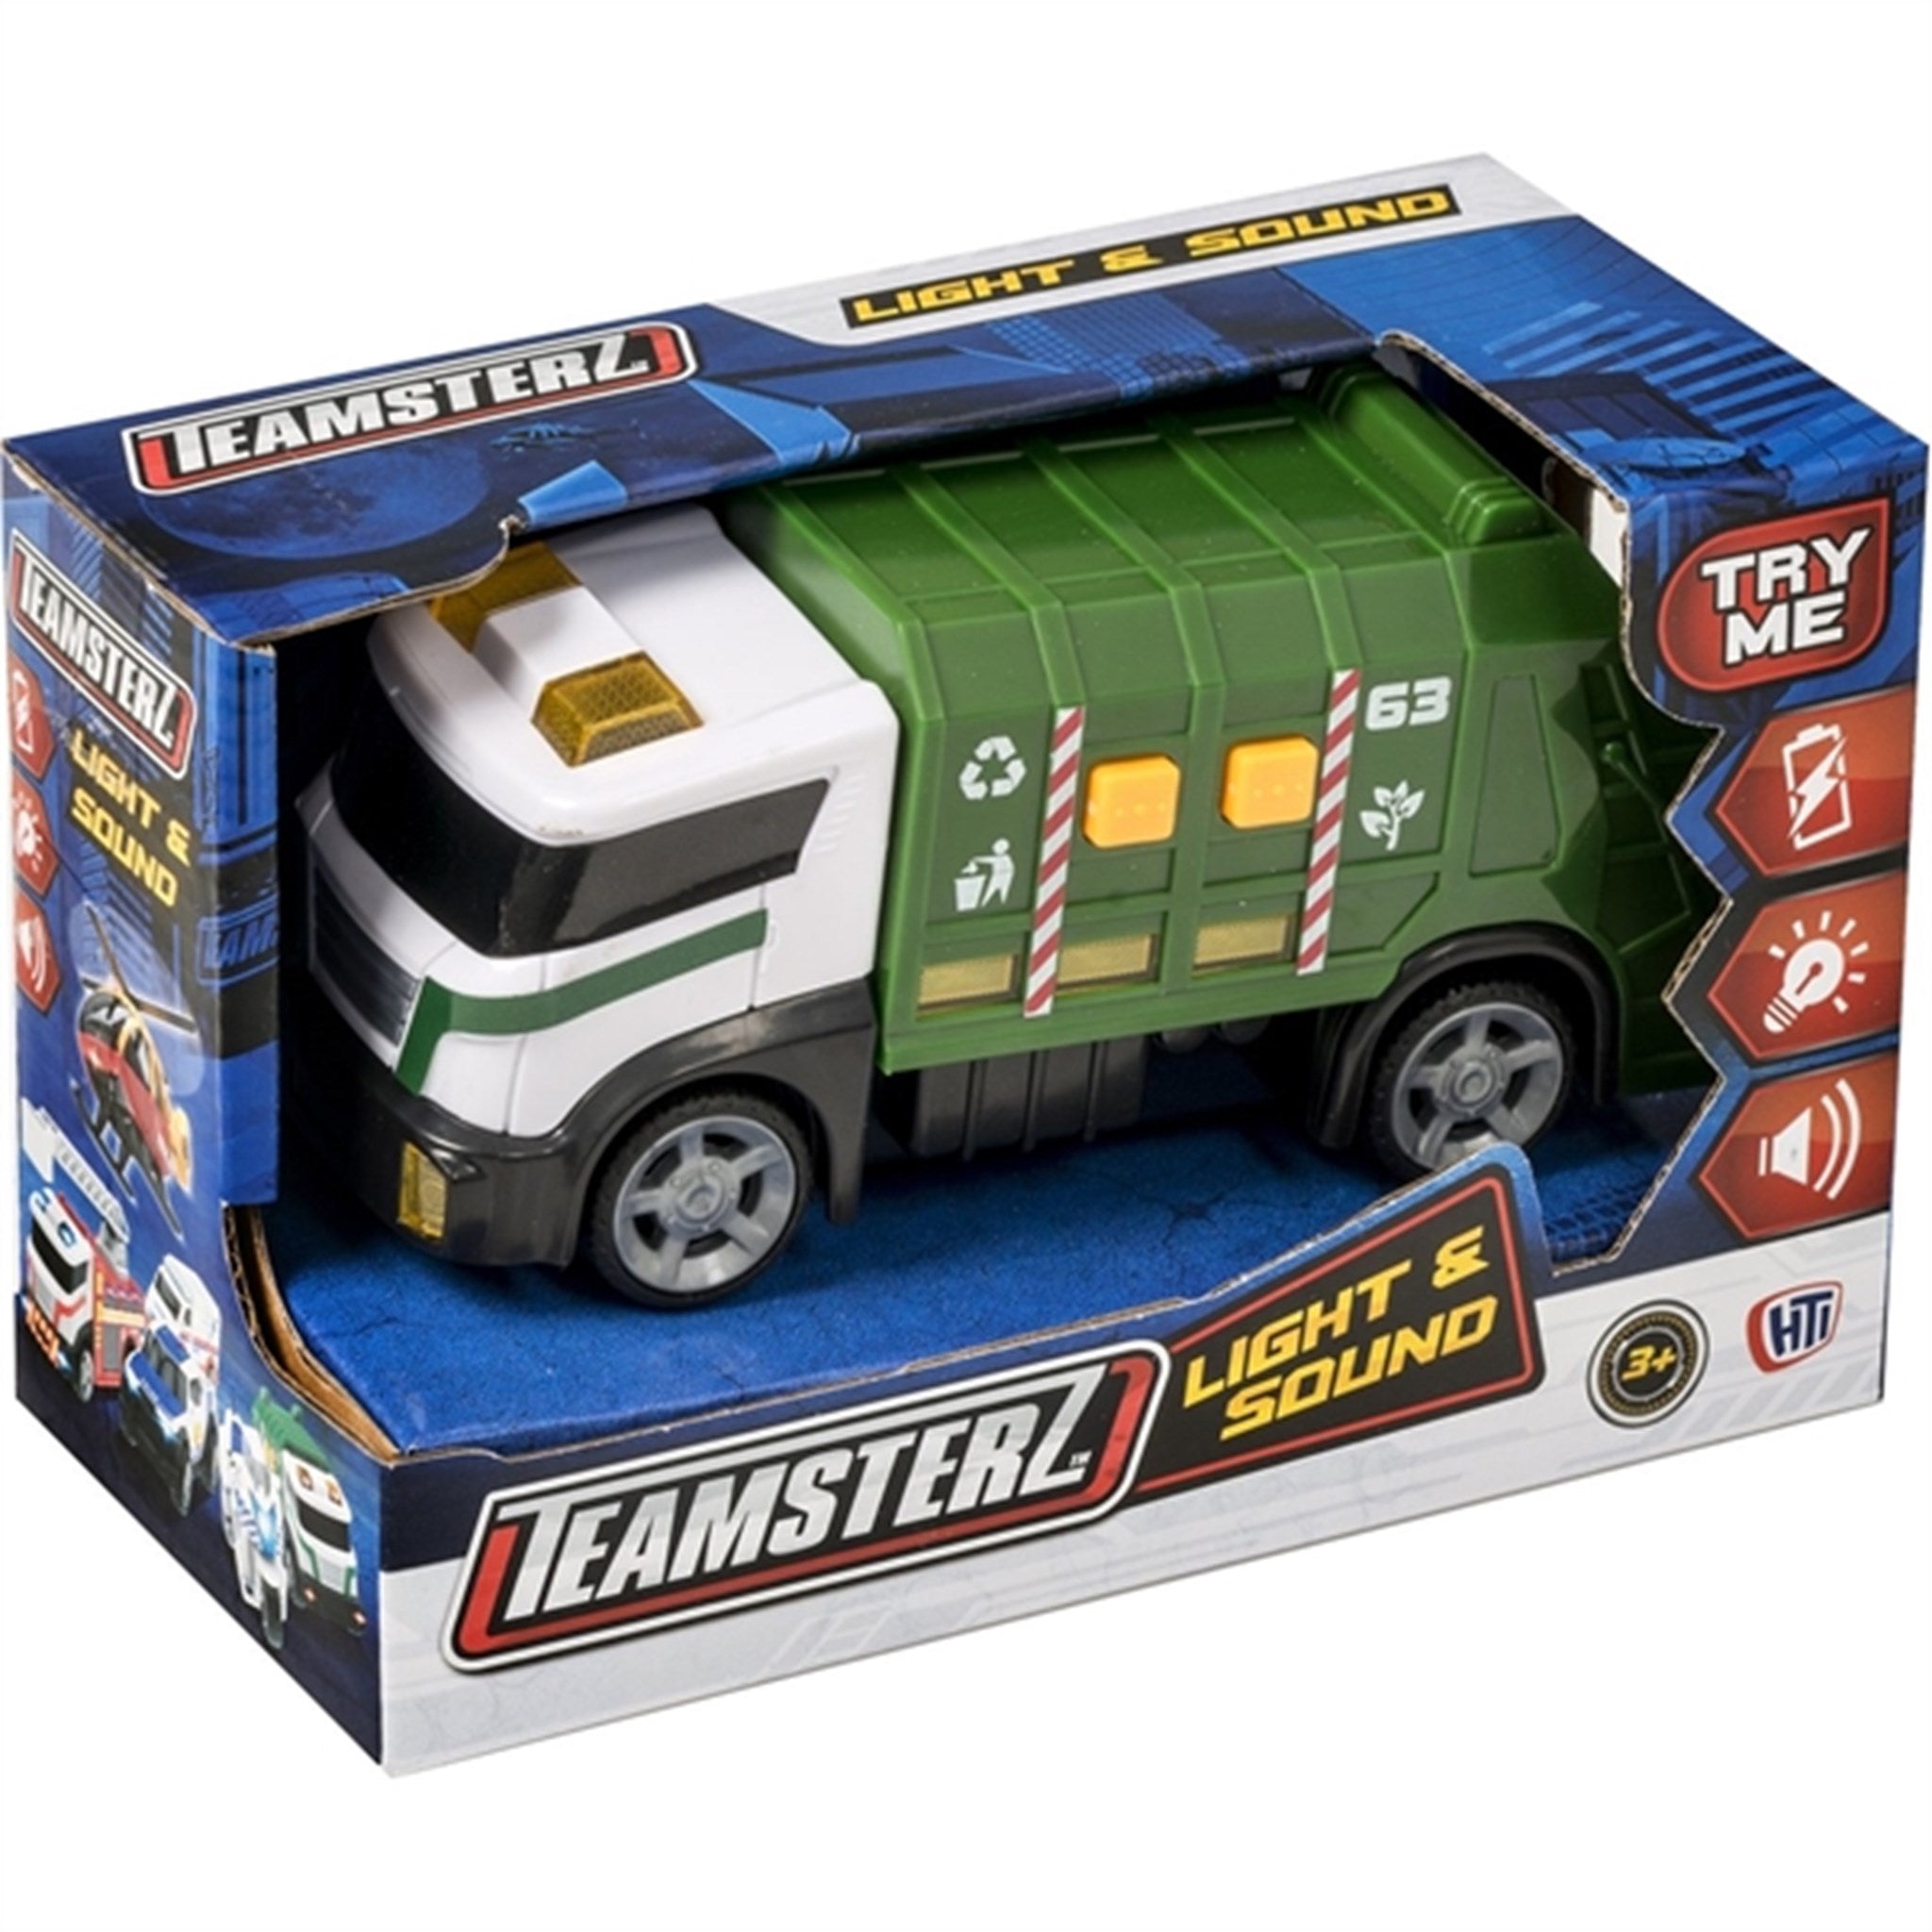 Teamsterz Small L&S Garbage Truck 6